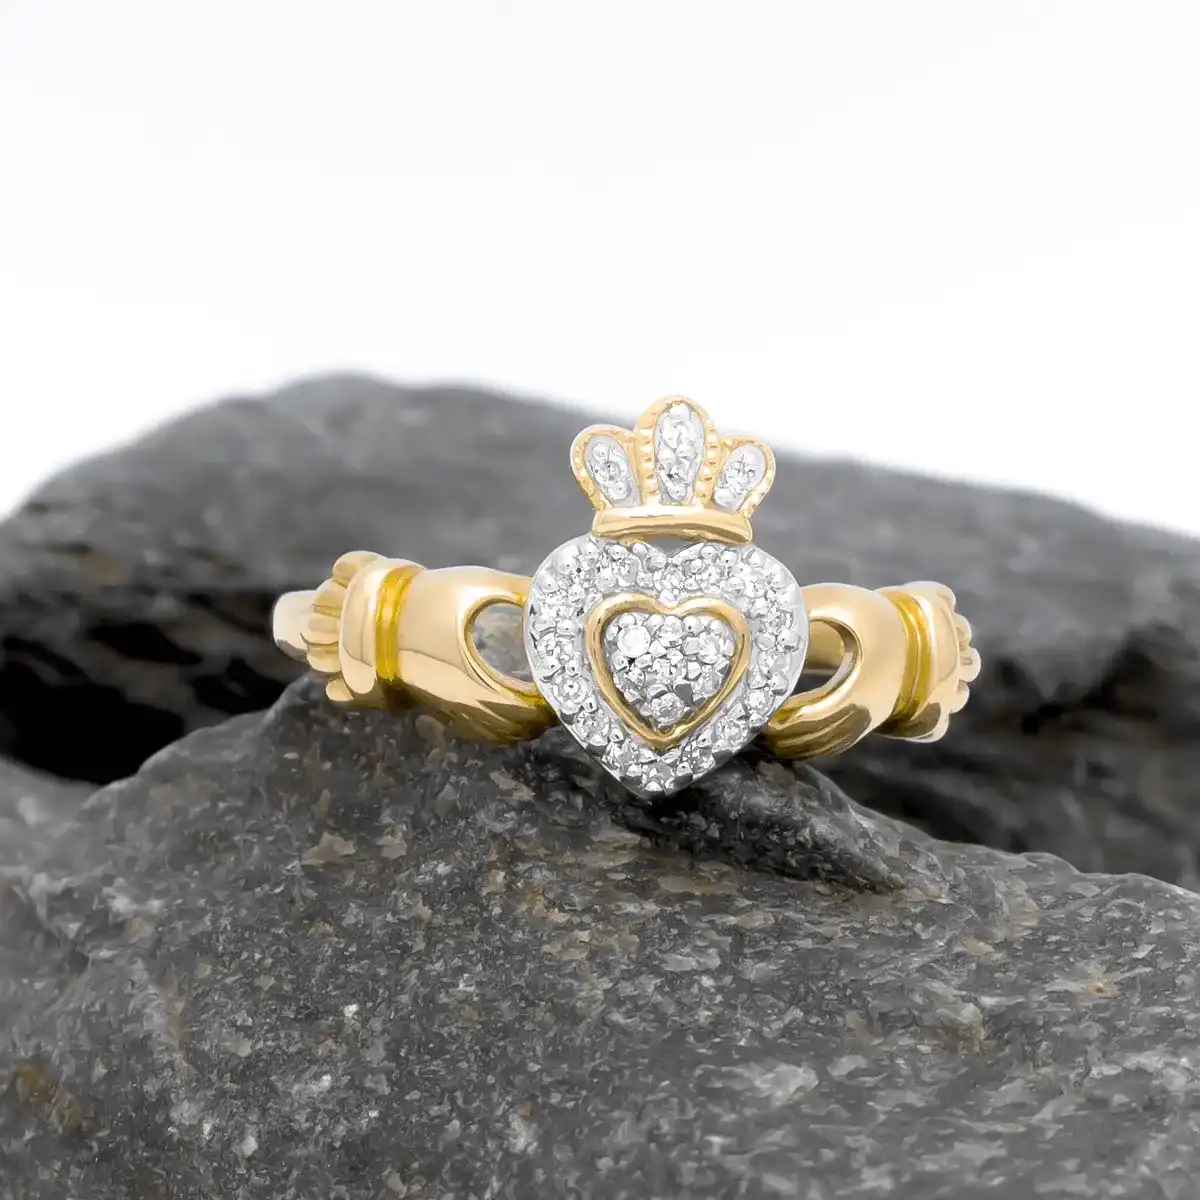 The History And Meaning of How to Wear Claddagh Ring | Sarah Scoop